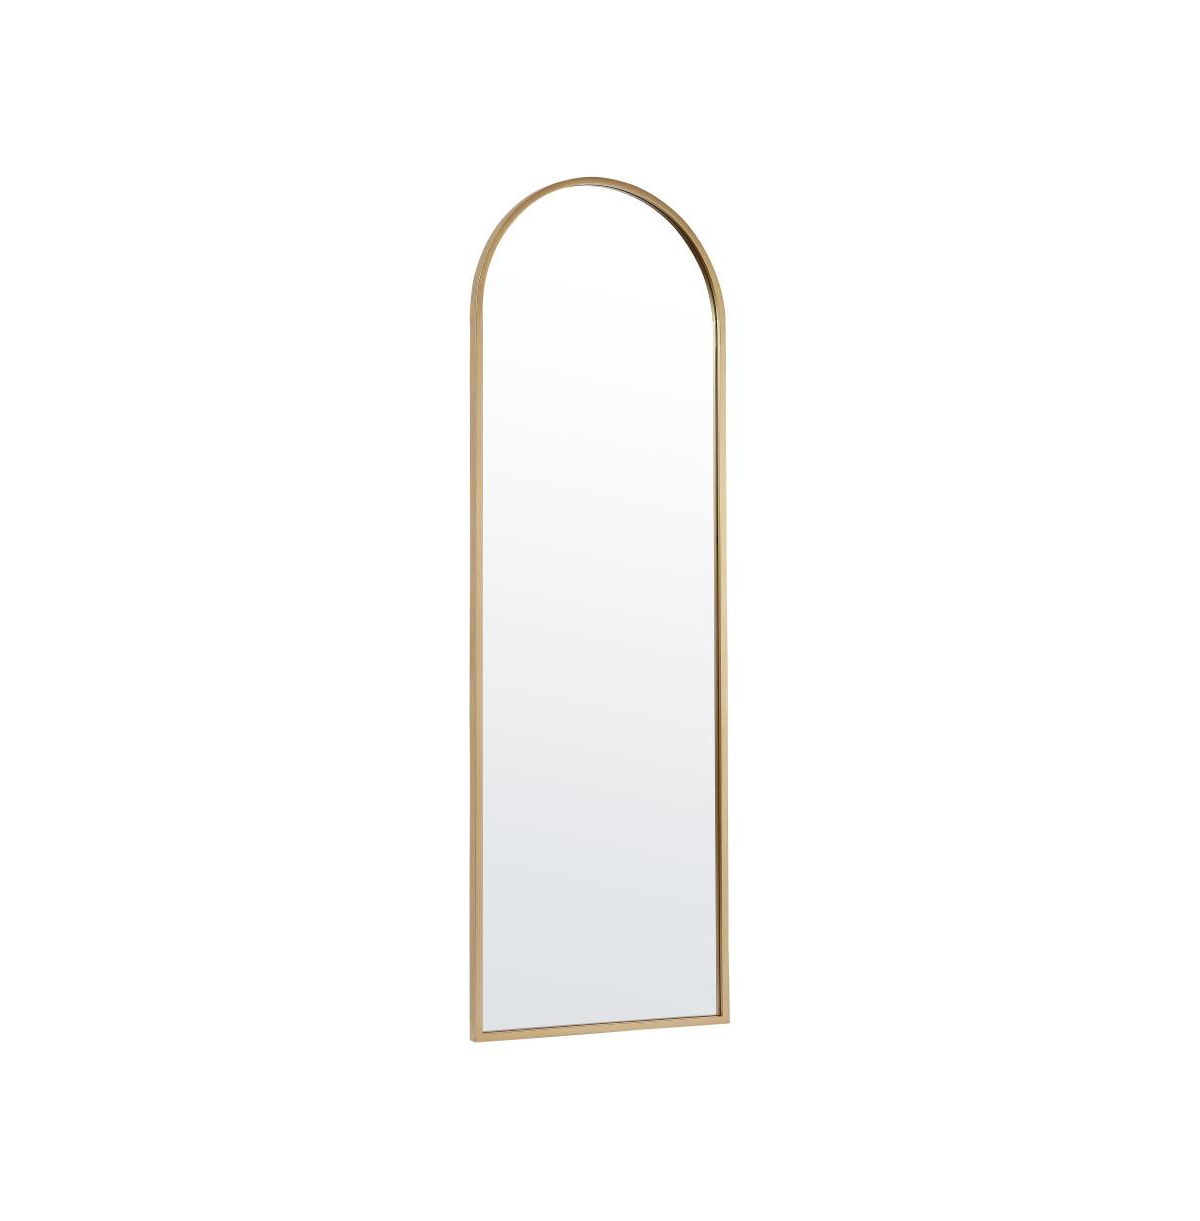 Muriel Arched Metal Framed Wall Mirror For Entryways, Dining Rooms, And Living Rooms - Gold